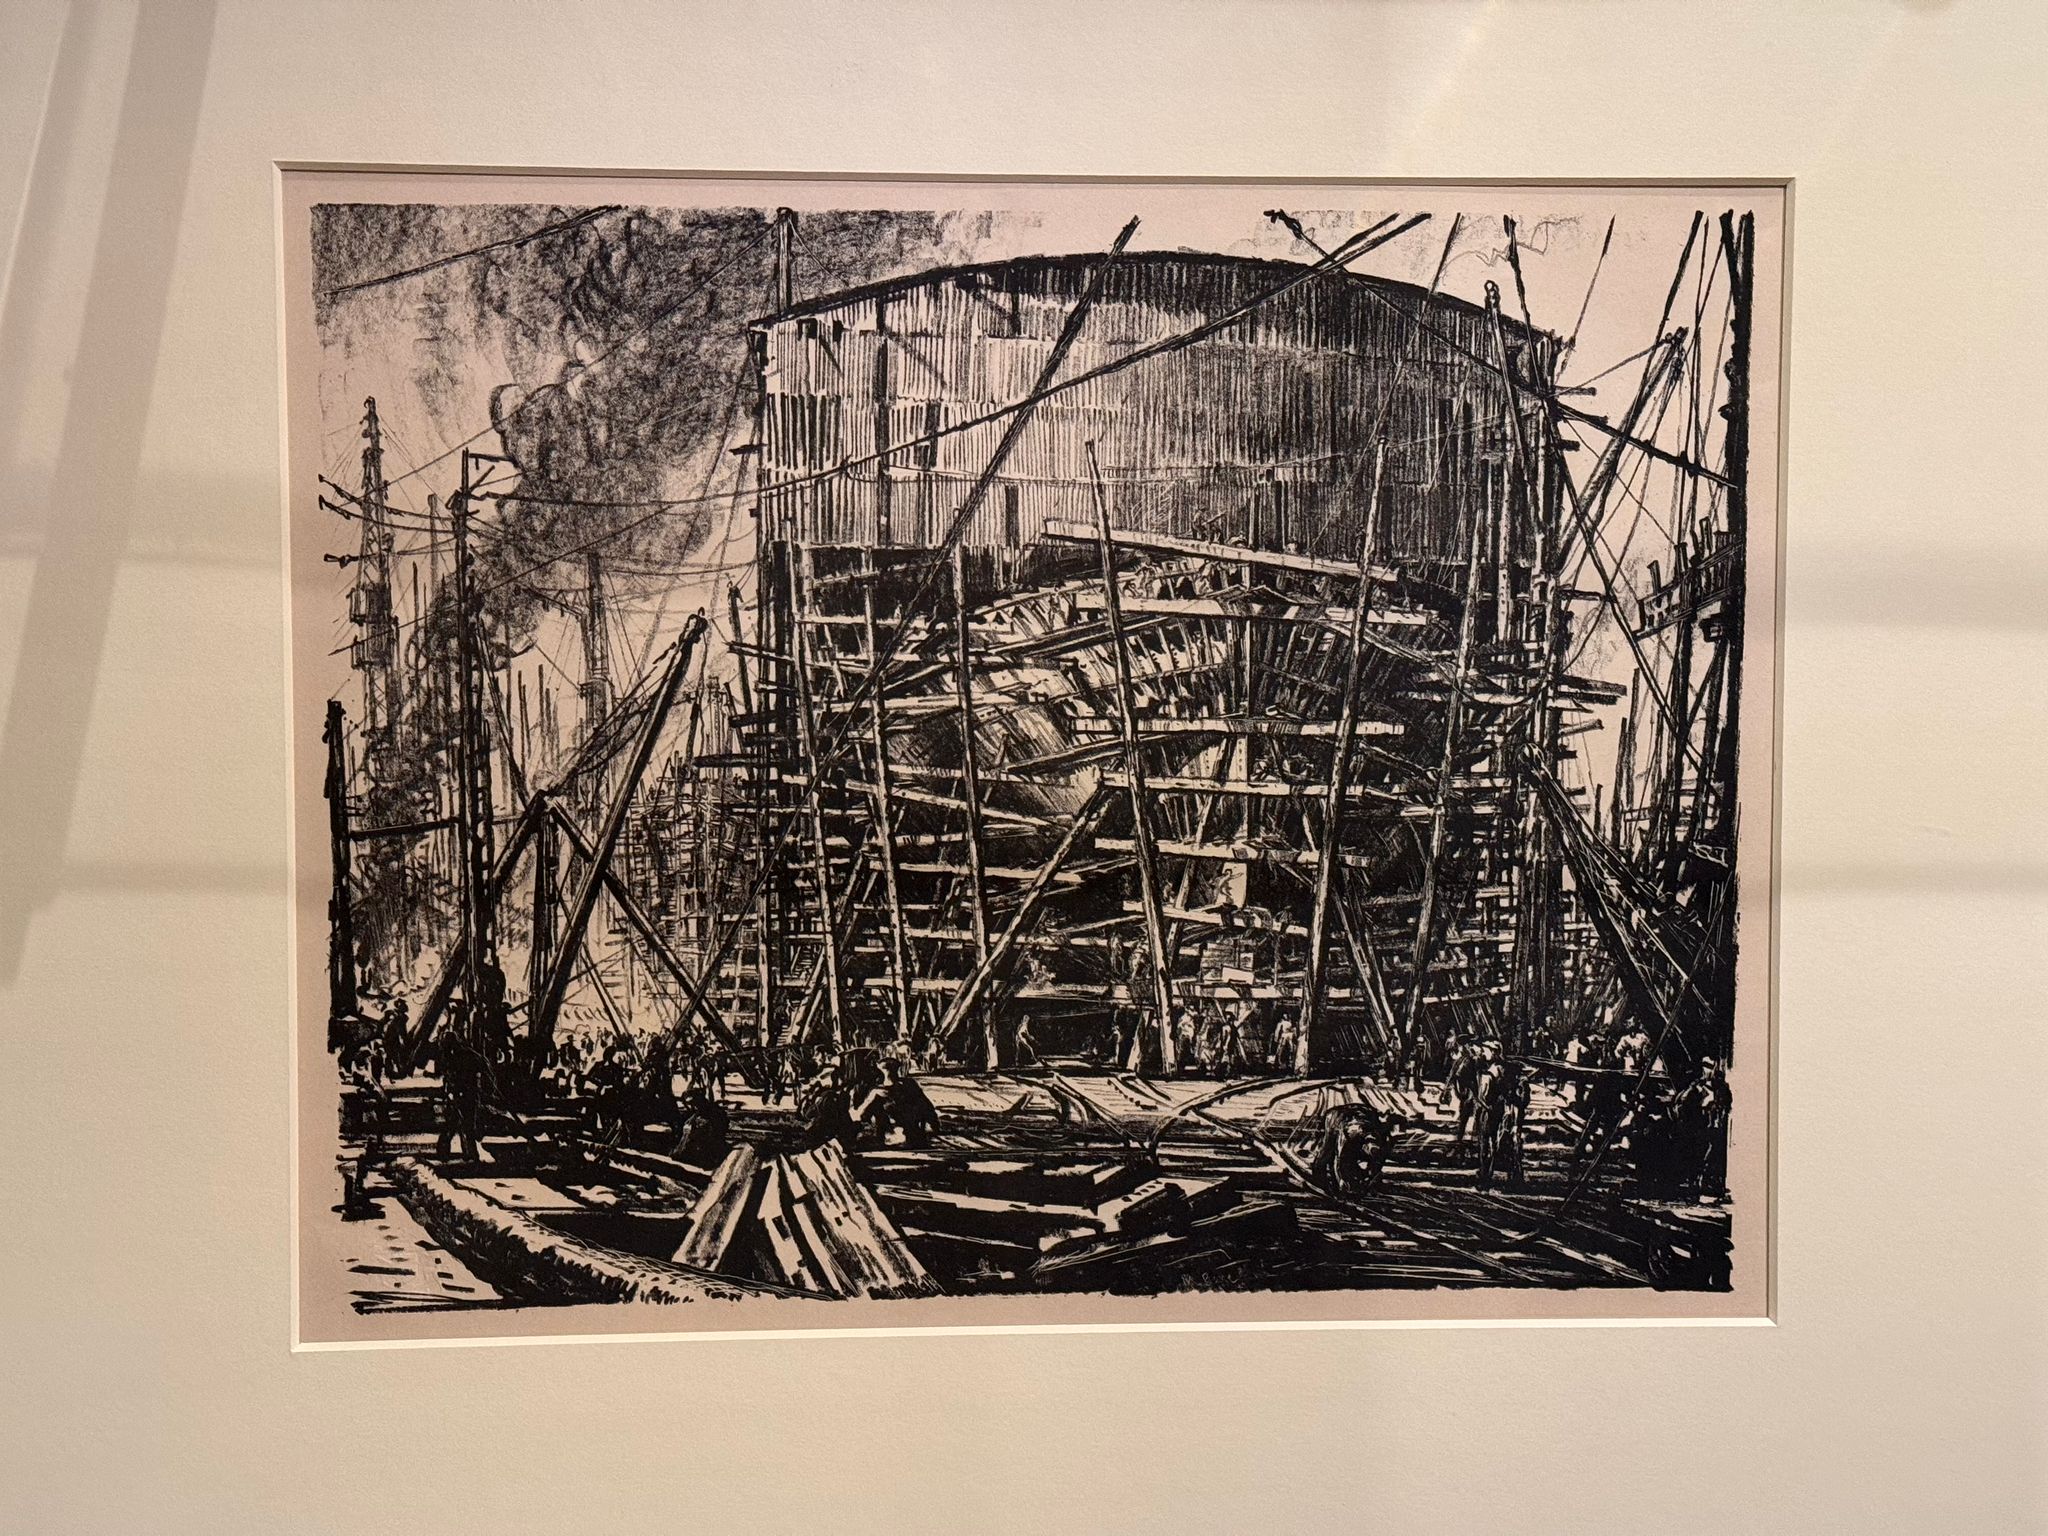 ‘Building Ships’ from the series The Great War: Britain’s Efforts and Ideals